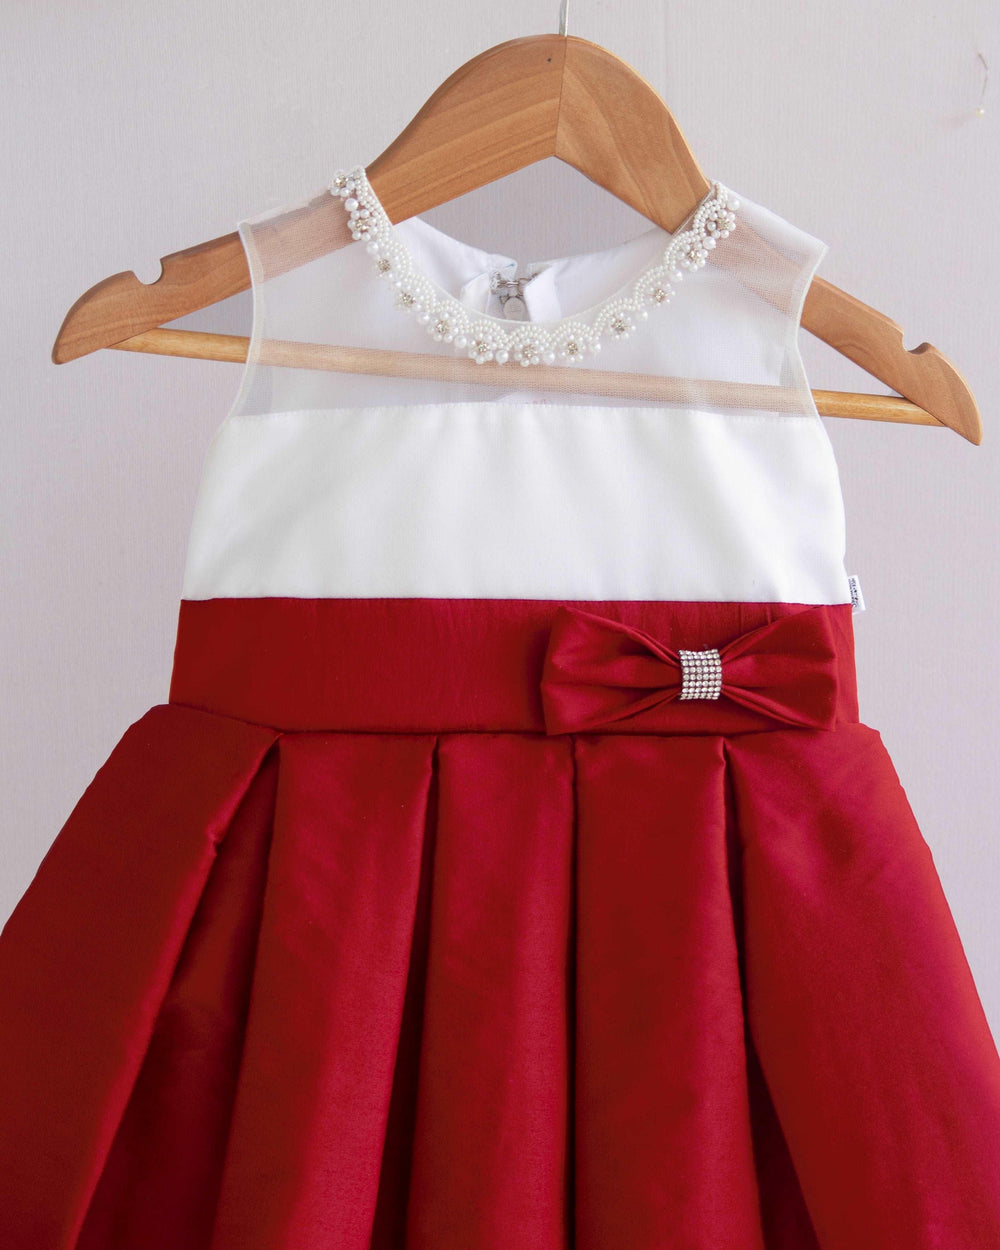 Red & White Combo Baby-Girls Box Pleated Tafetta Silk Handwork Frock
Material : Red shade party perfect box pleats frock is made with soft taffeta silk fabric. The yoke portion of the frock is designed in transparent neck design with